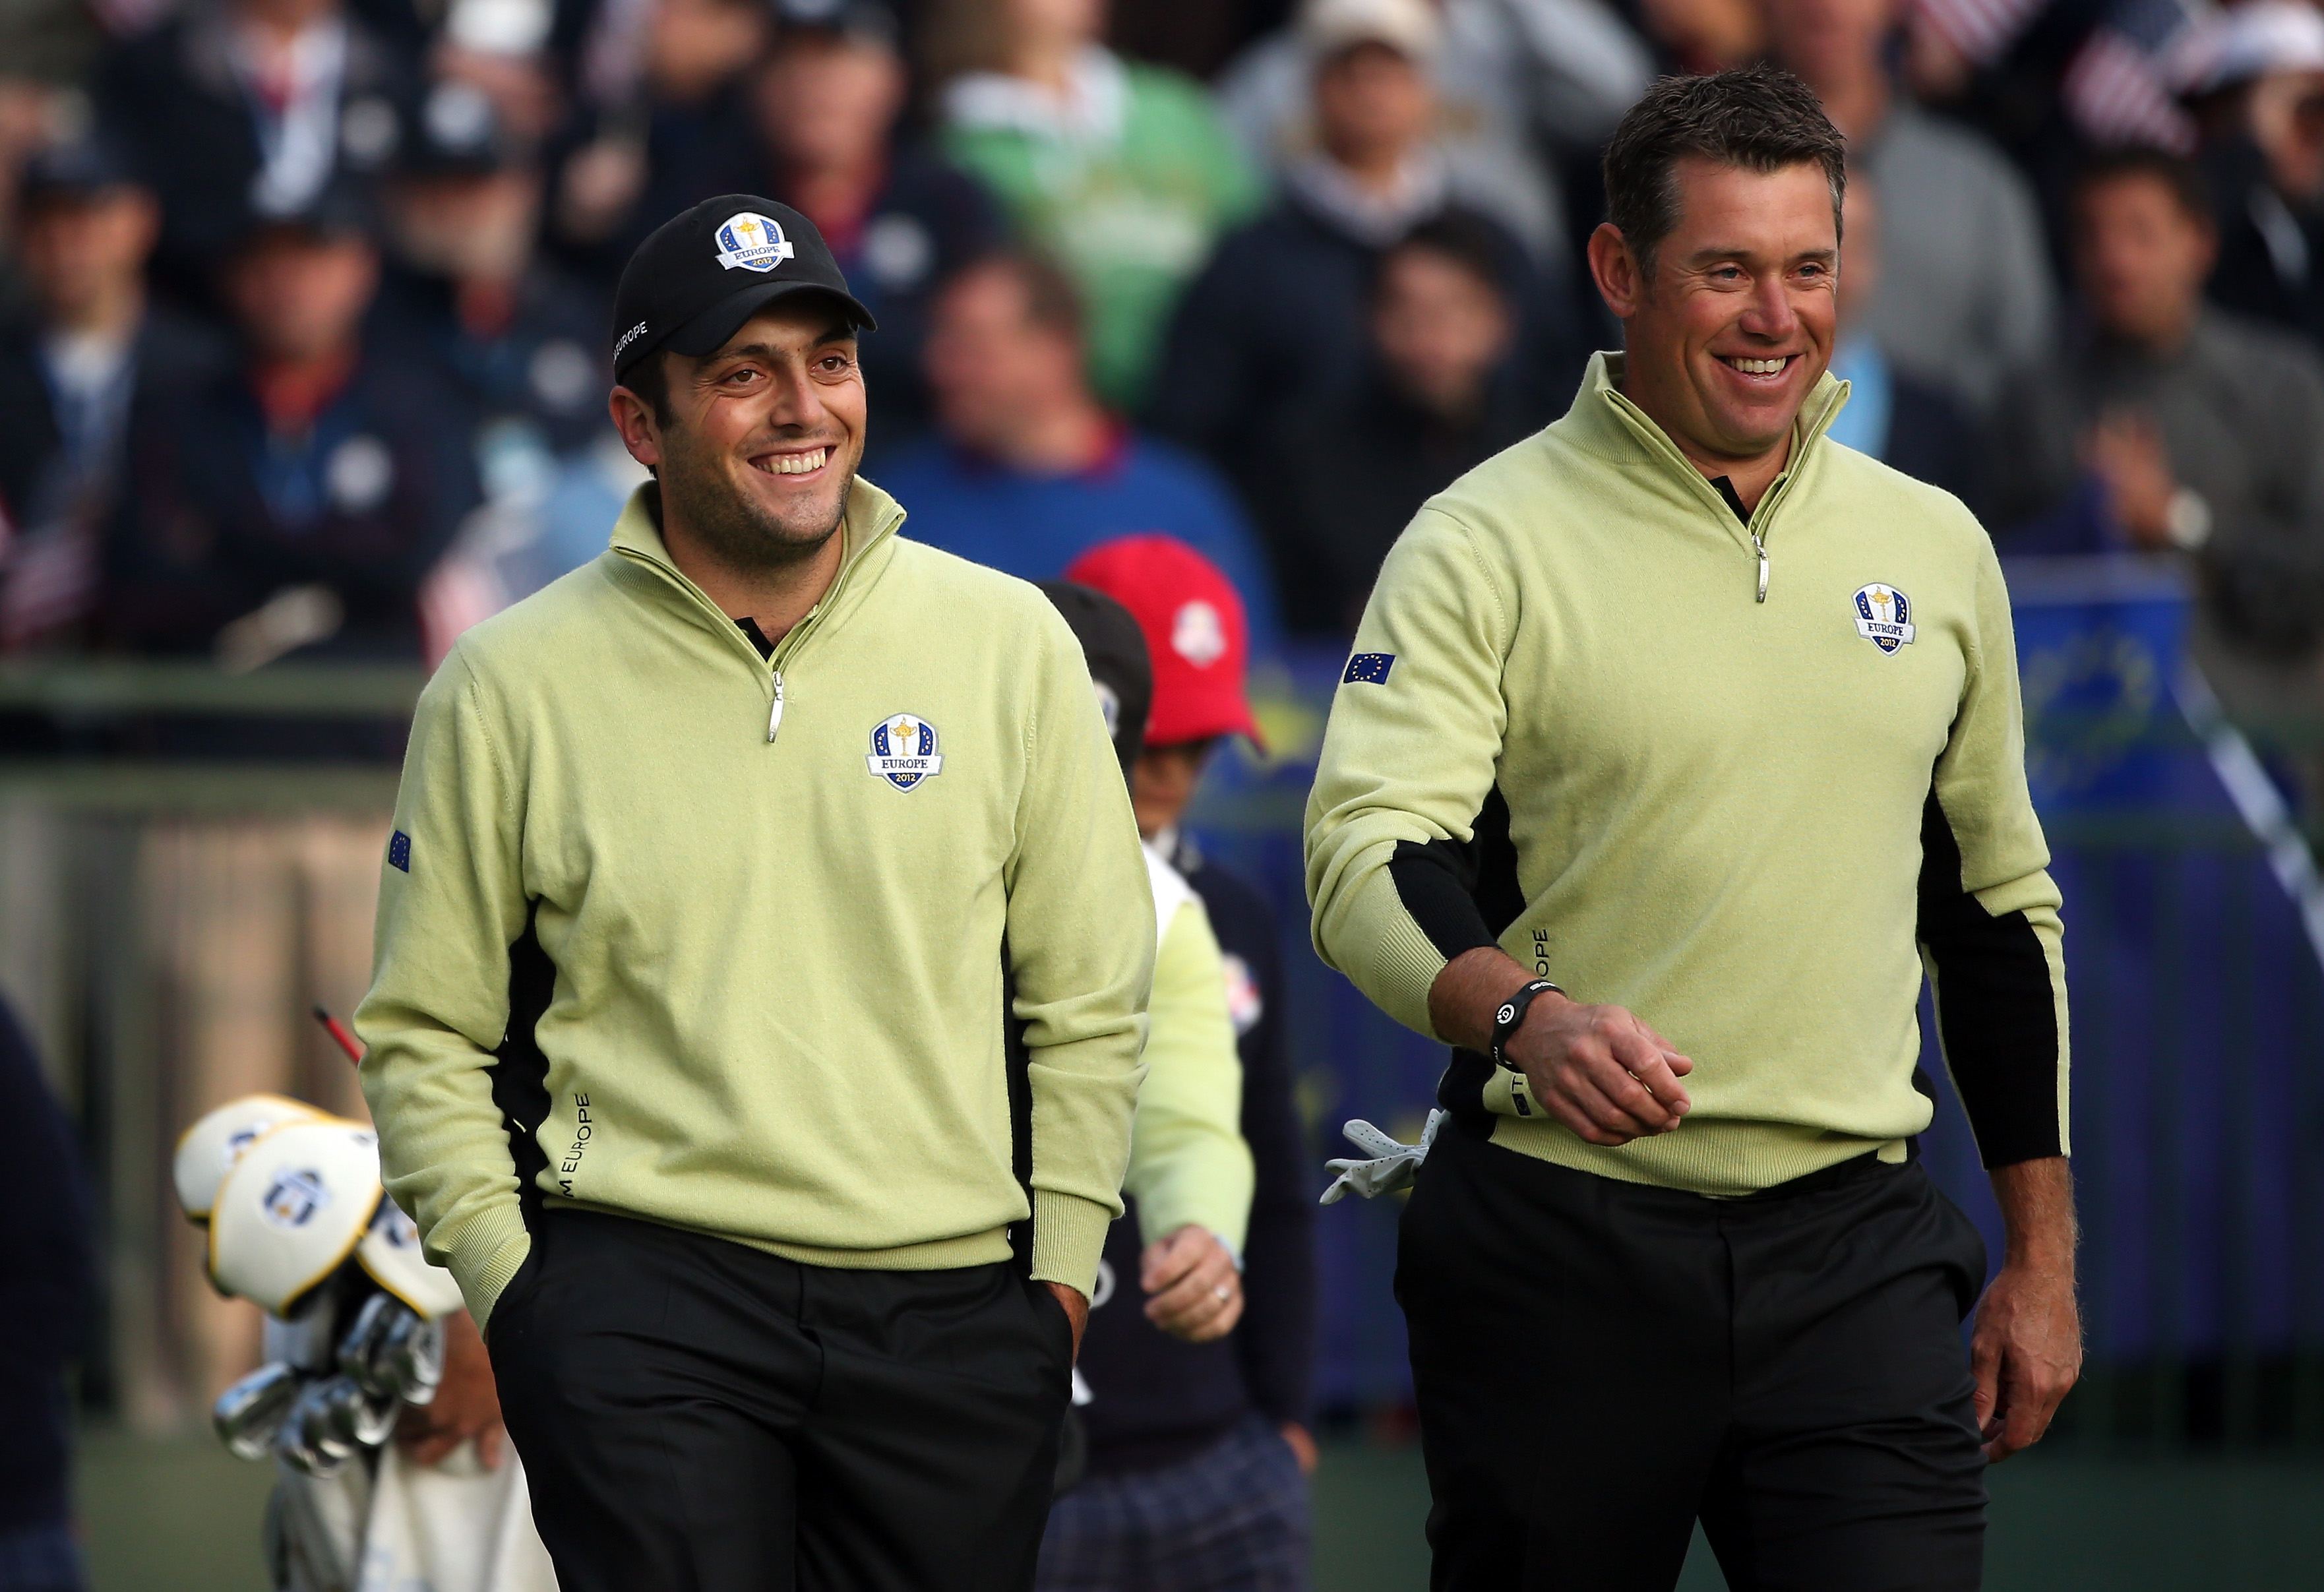 Ryder Cup - Day One Foursomes